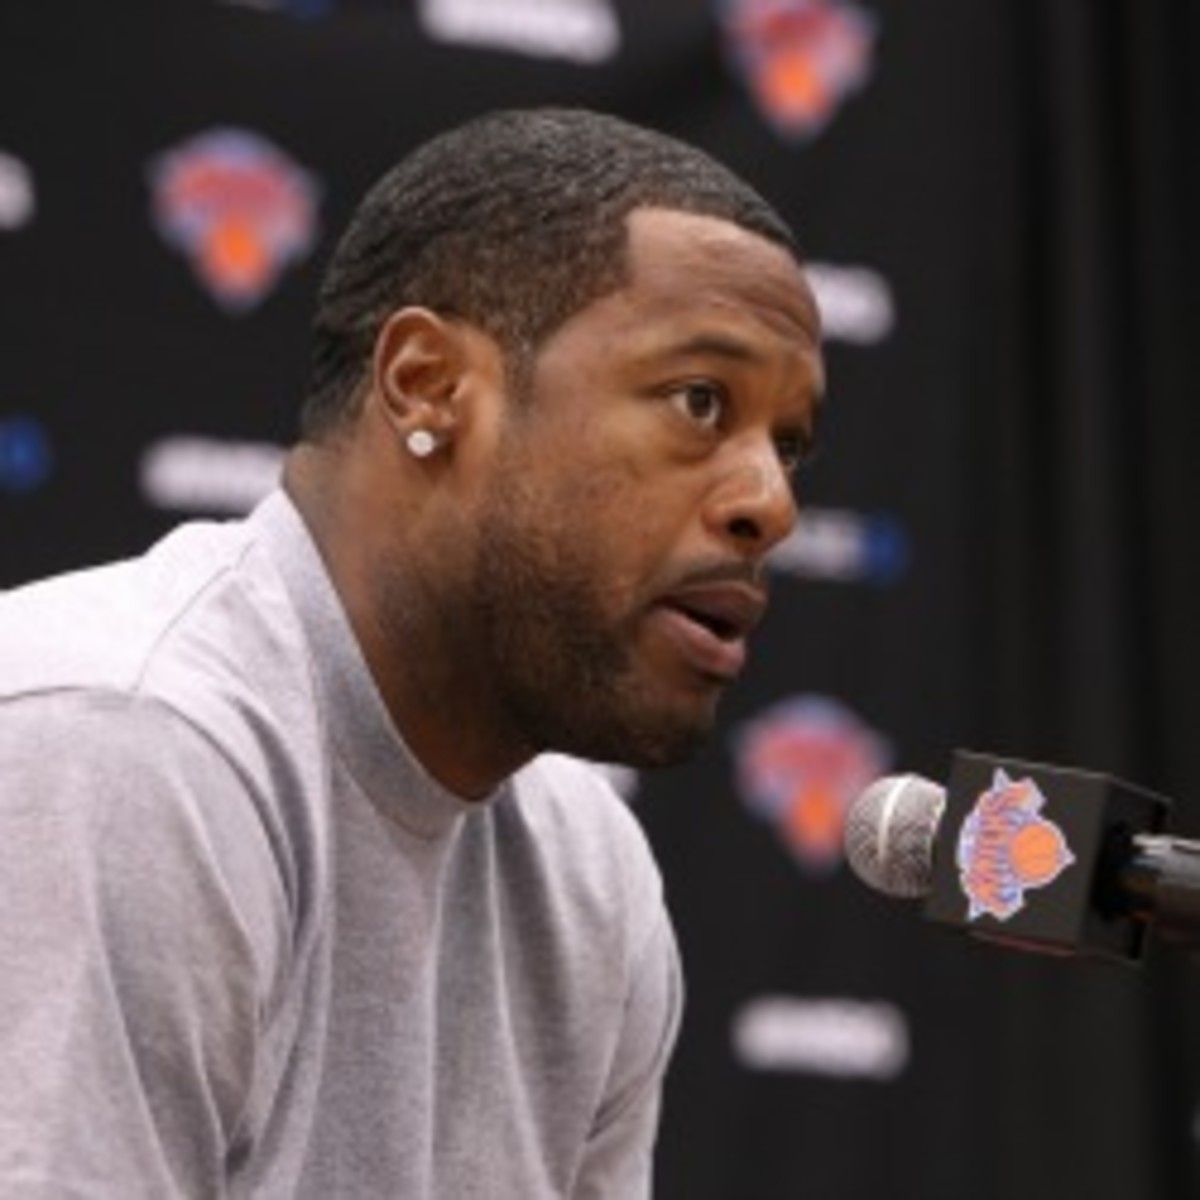 Knicks center Marcus Camby will likely be out for the next two games with plantar fasciitis. (Joe Murphy/Getty Images)